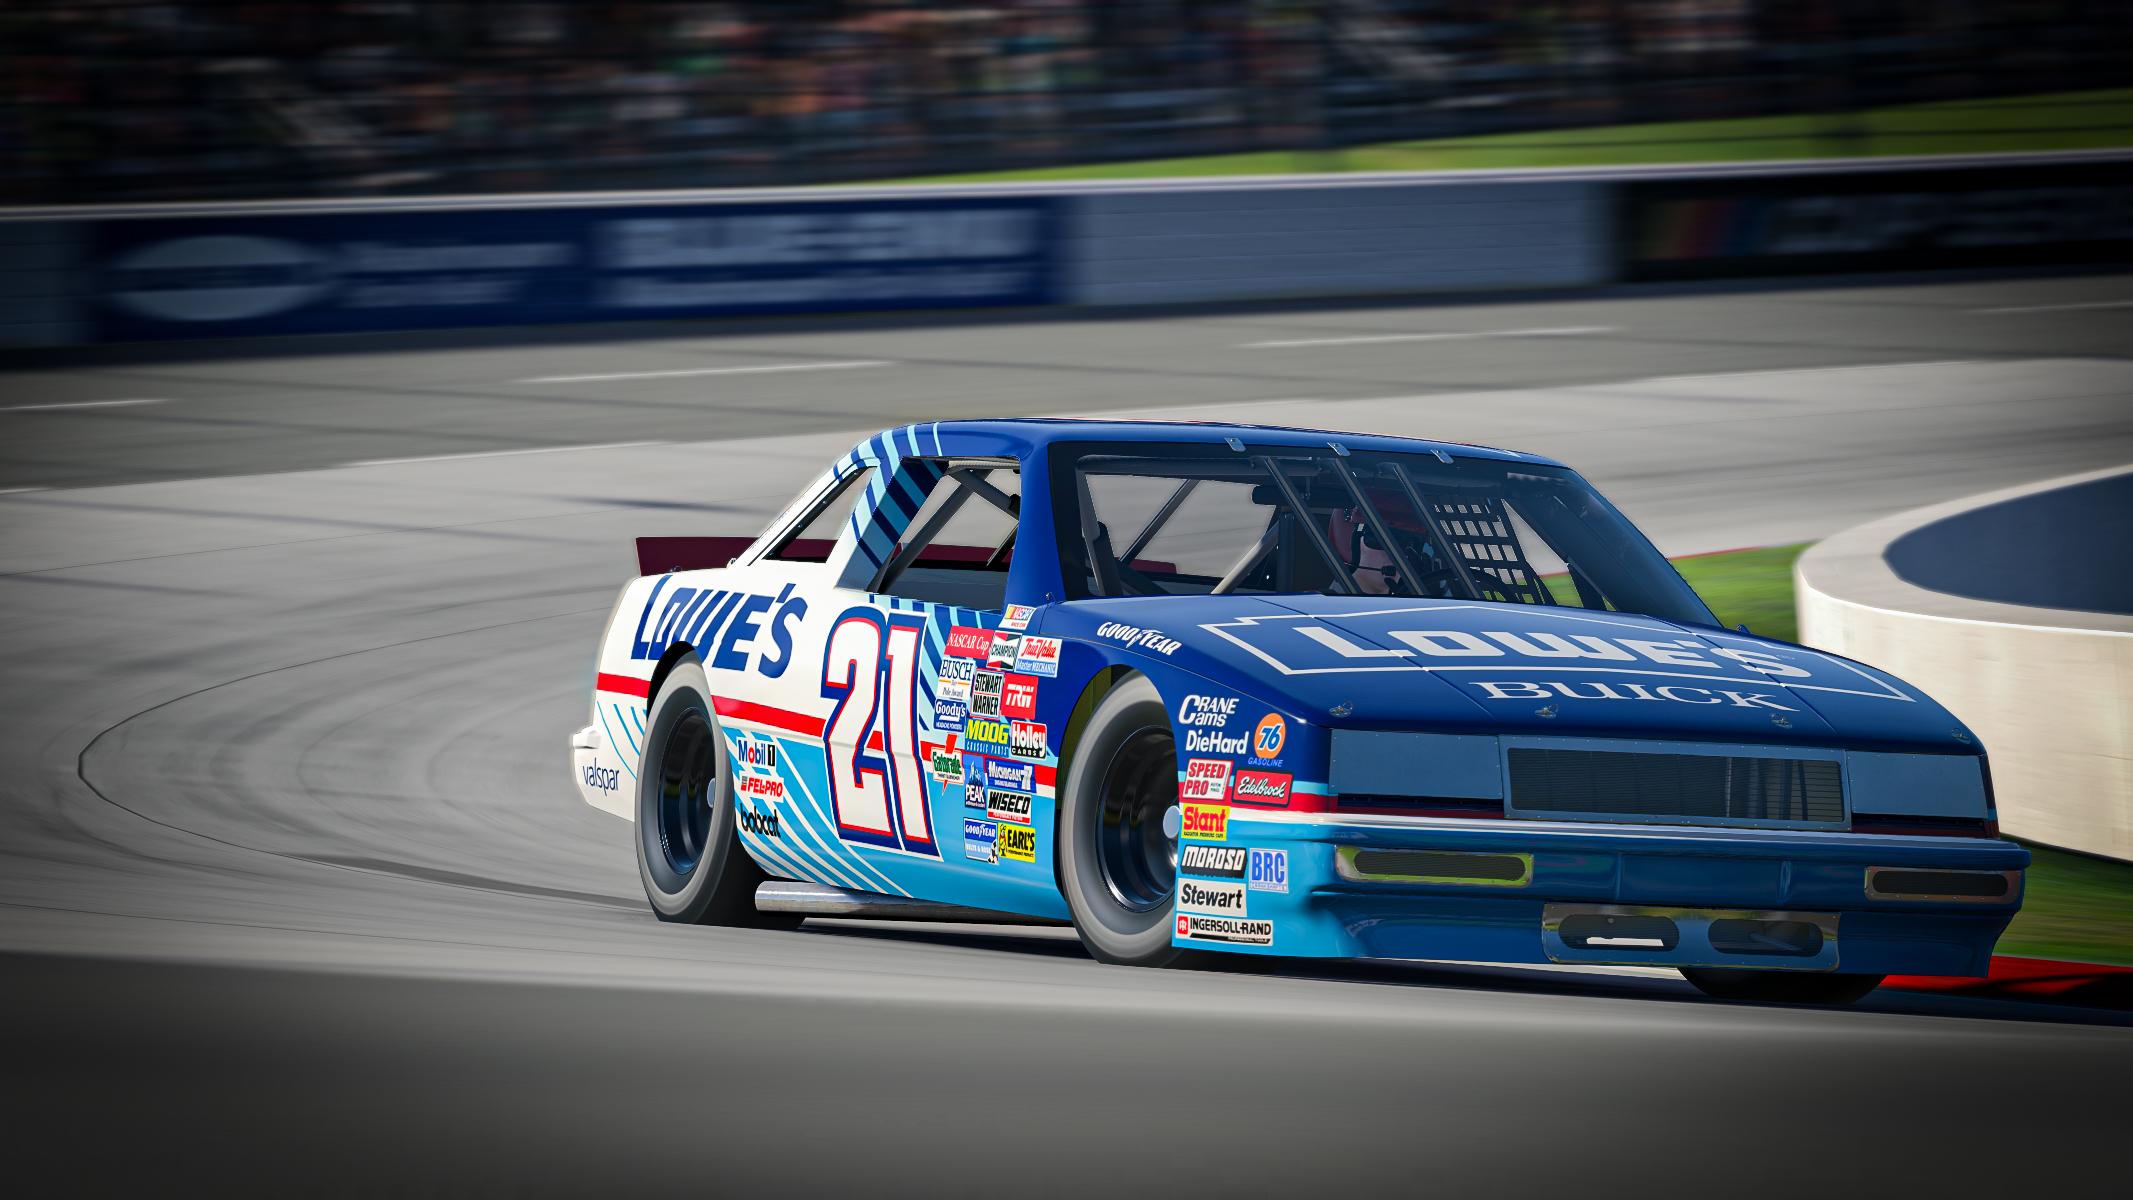 Preview of Lowes Buick LeSabre by Justin T Wilkinson